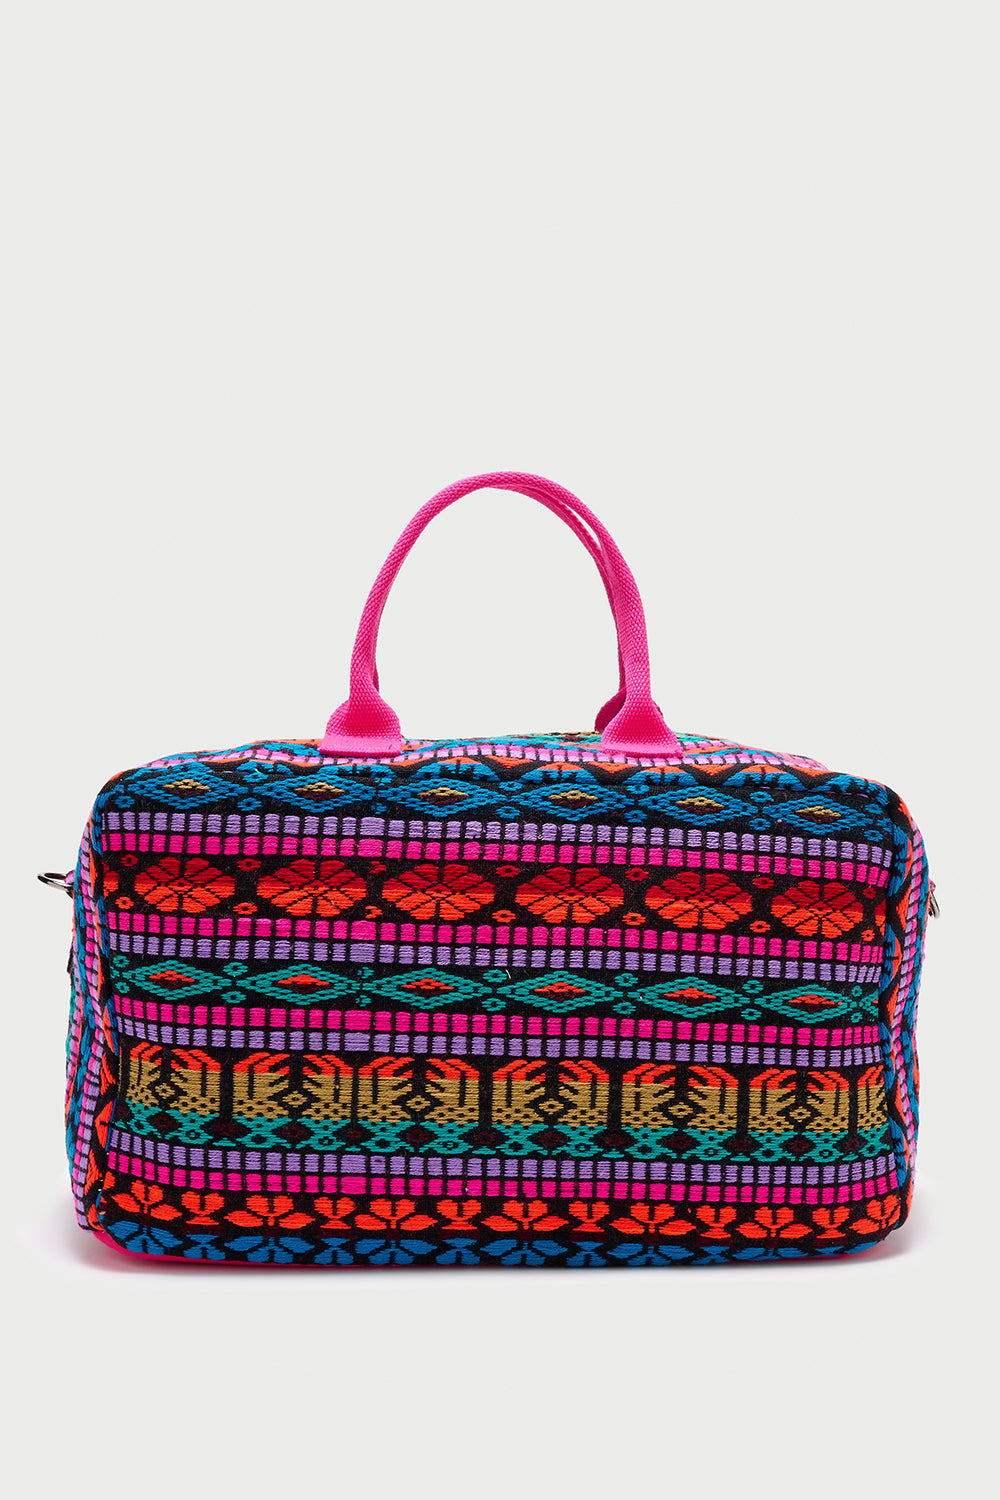 Coppola Weekend Bag: DEADSTOCK FABRIC - Bright Jacquard